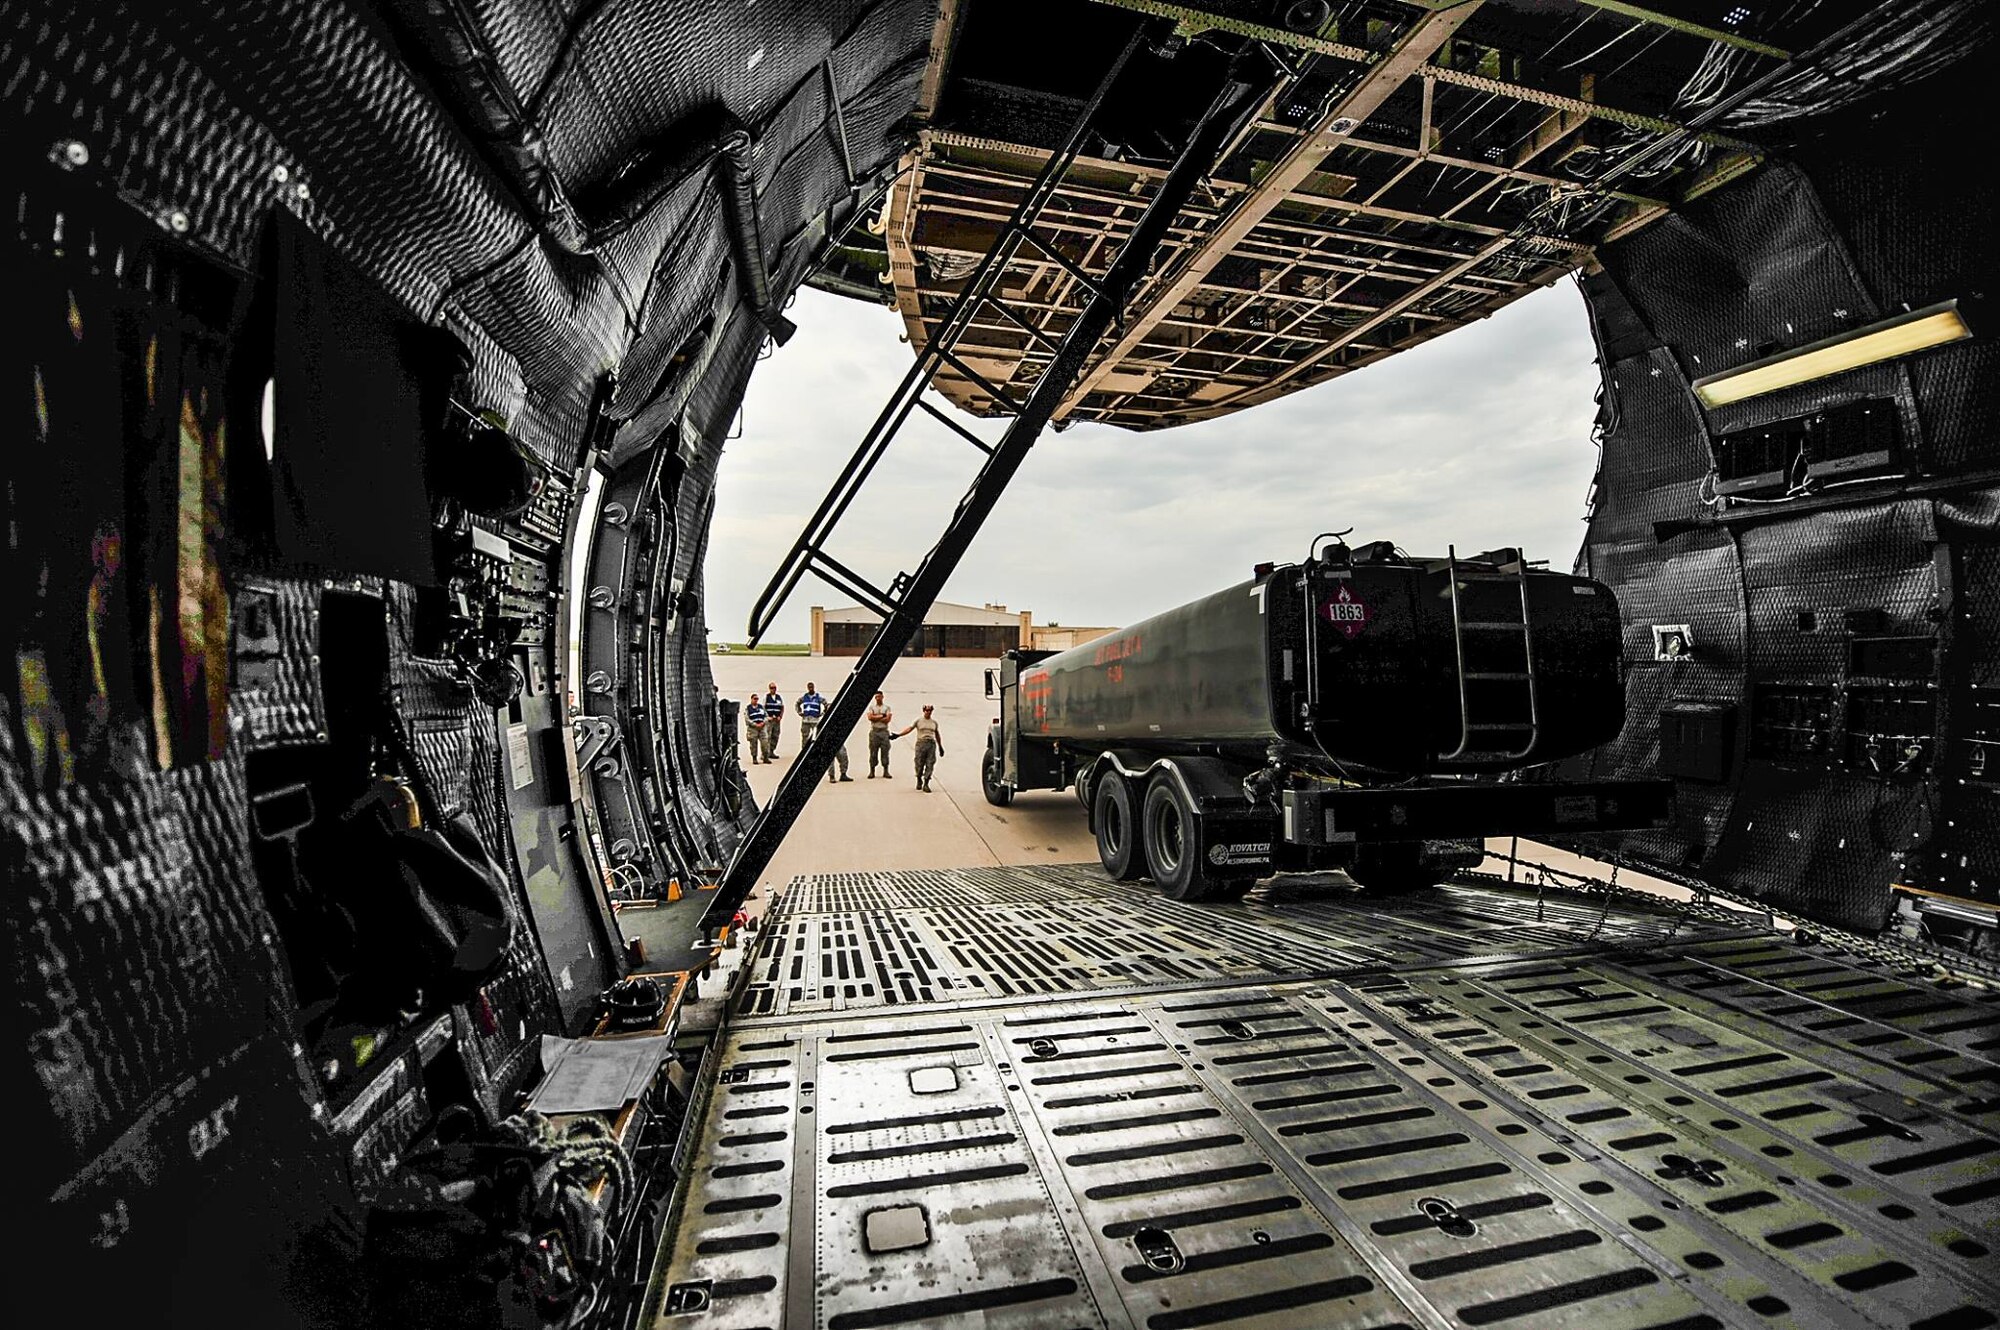 KC-135 Stratotanker boom operators and pilots watch as a fuel truck is loaded onto a C-5M Super Galaxy July 26, 2017, at McConnell Air Force Base, Kan.  Many of the boom operators and pilots are in training for the new KC-46A Pegasus, a multirole aircraft with greater airlift capabilities similar to the Super Galaxy. (U.S. Air Force photo/2nd Lt.  Daniel de La Fe)